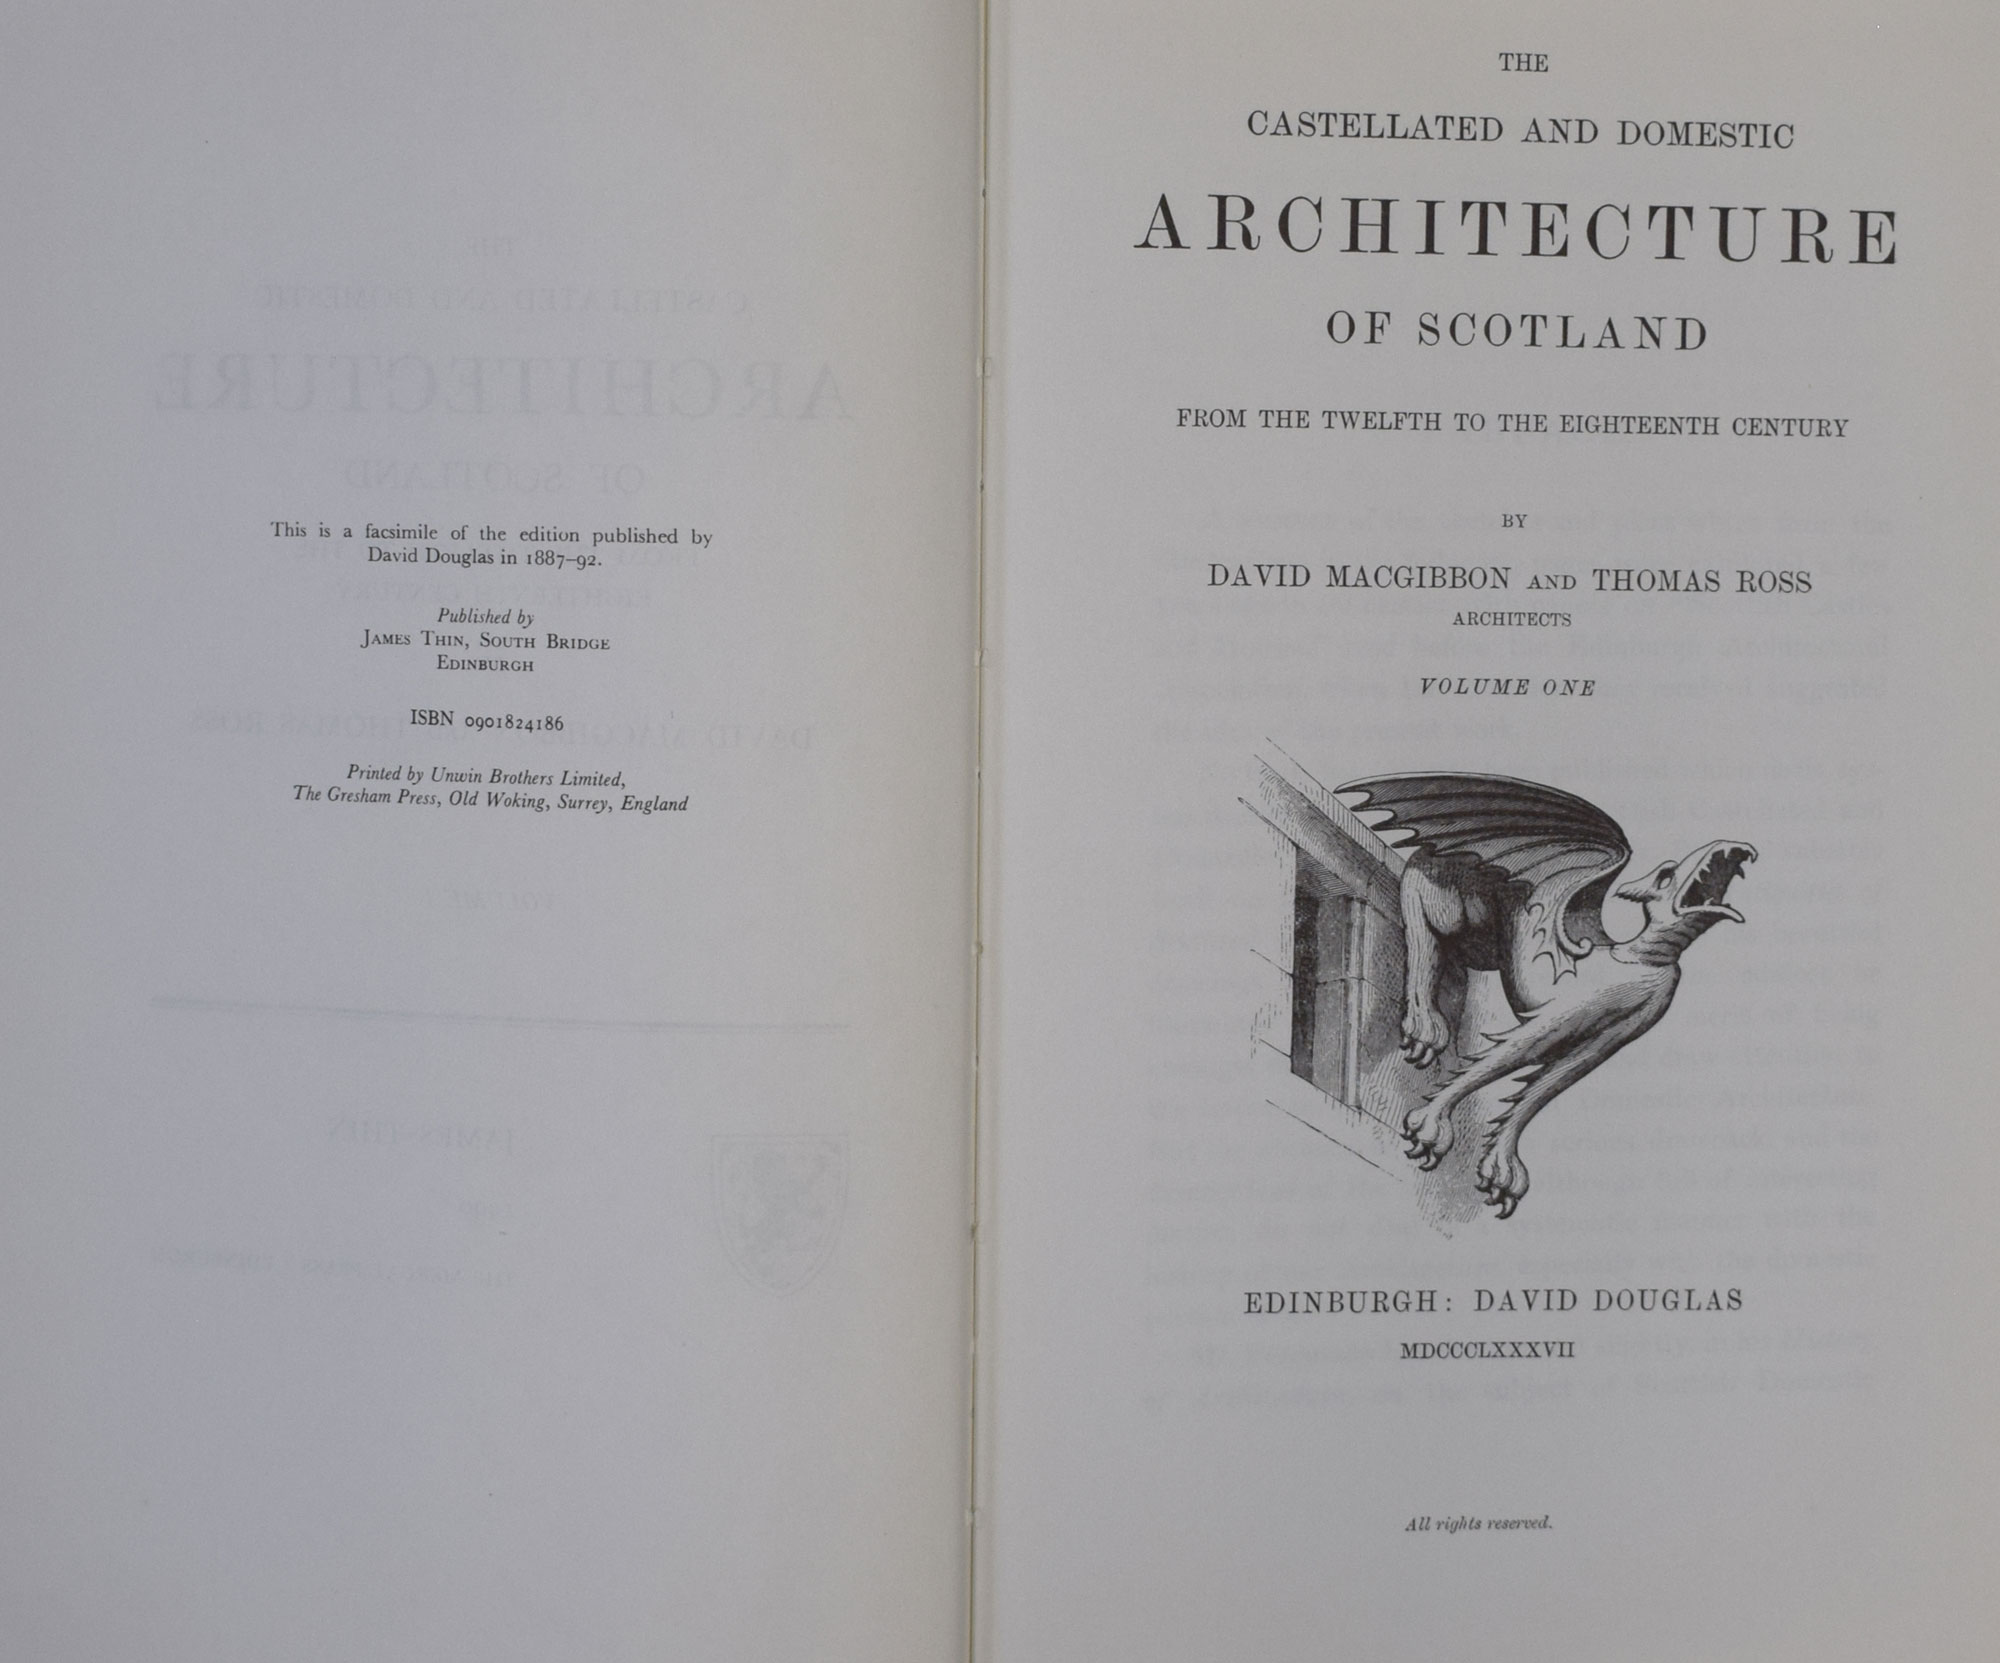 The Castellated and Domestic Architecture of Scotland from the Twelfth Century to the Eighteenth Century. 5 volume set.